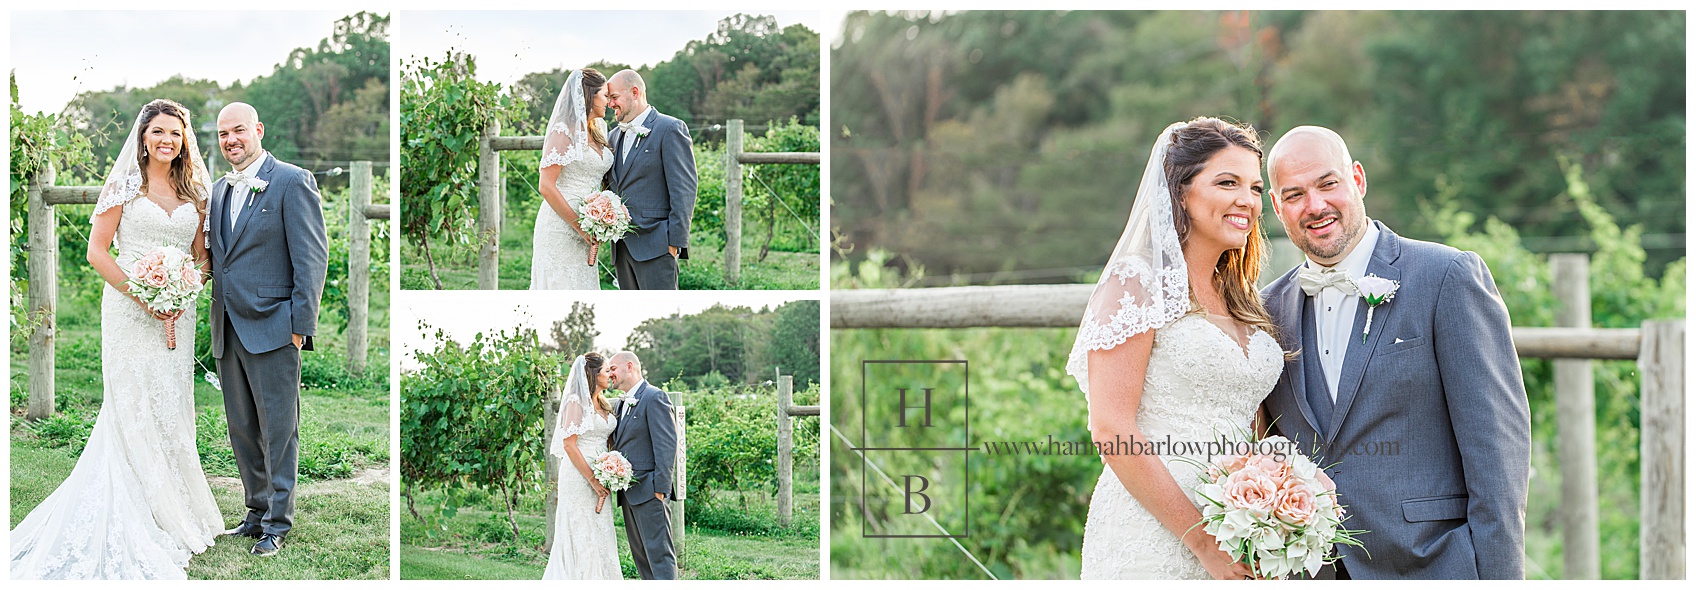 Bride and Groom Photos in the Vineyards at Pine Lake